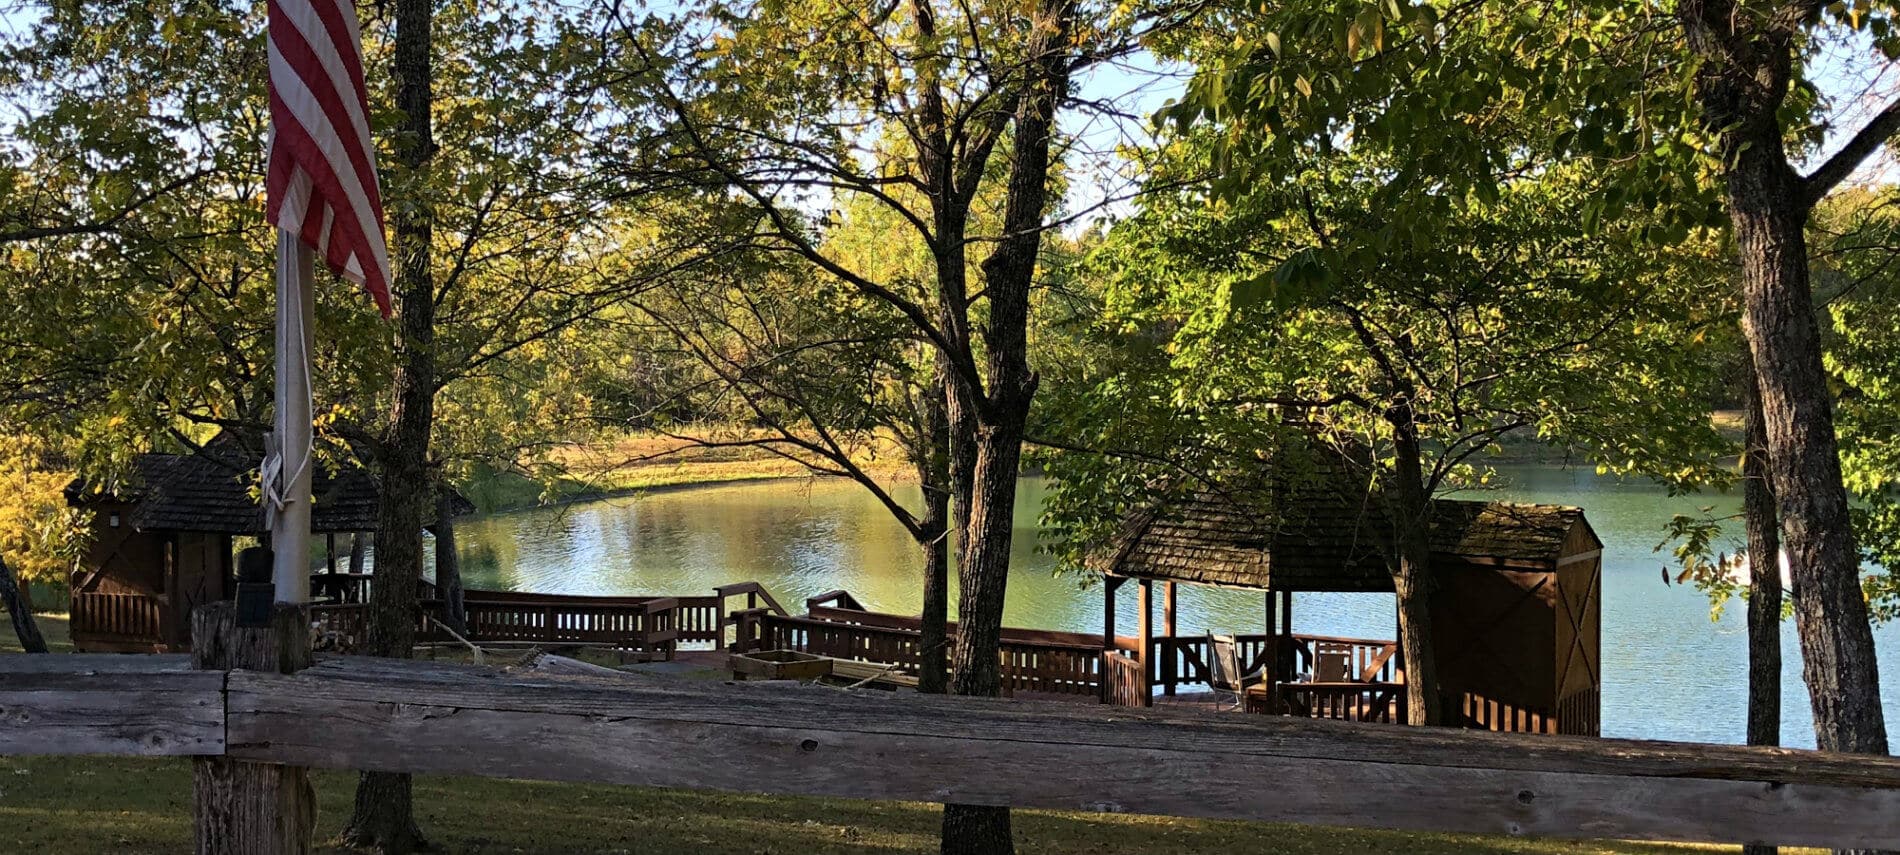 View of the pond and gazebos through the trees